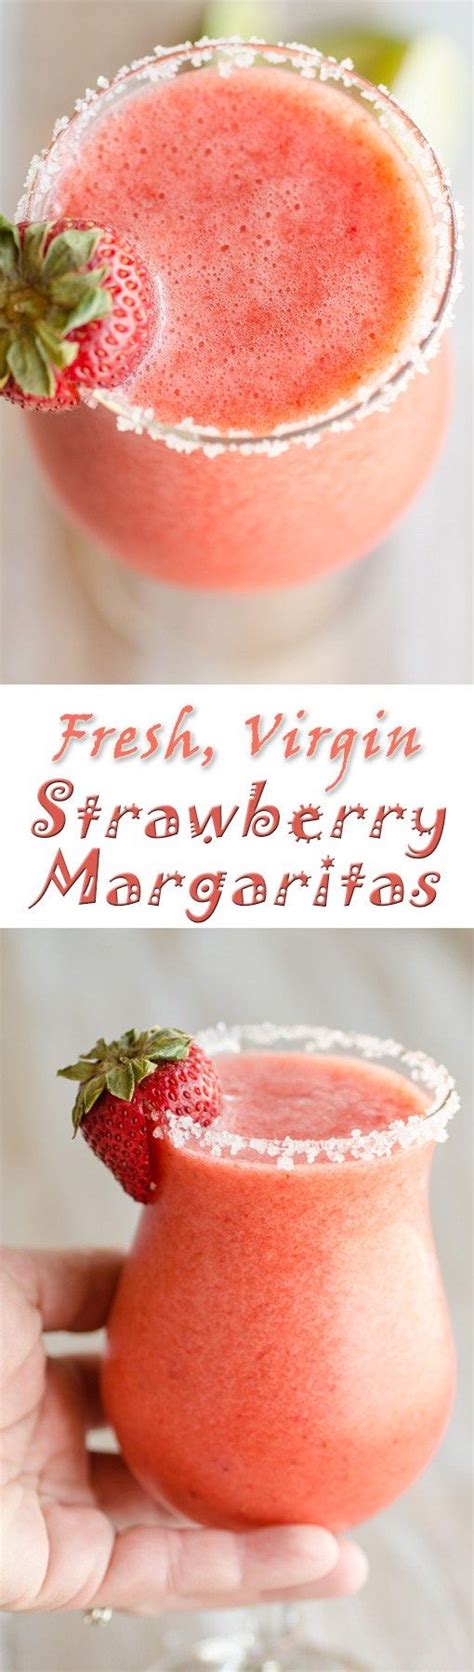 From taco night to girls' night, strawberry basil margaritas are the freshest summer sippers around. Fresh Virgin Strawberry Margaritas | Recipe | Virgin ...